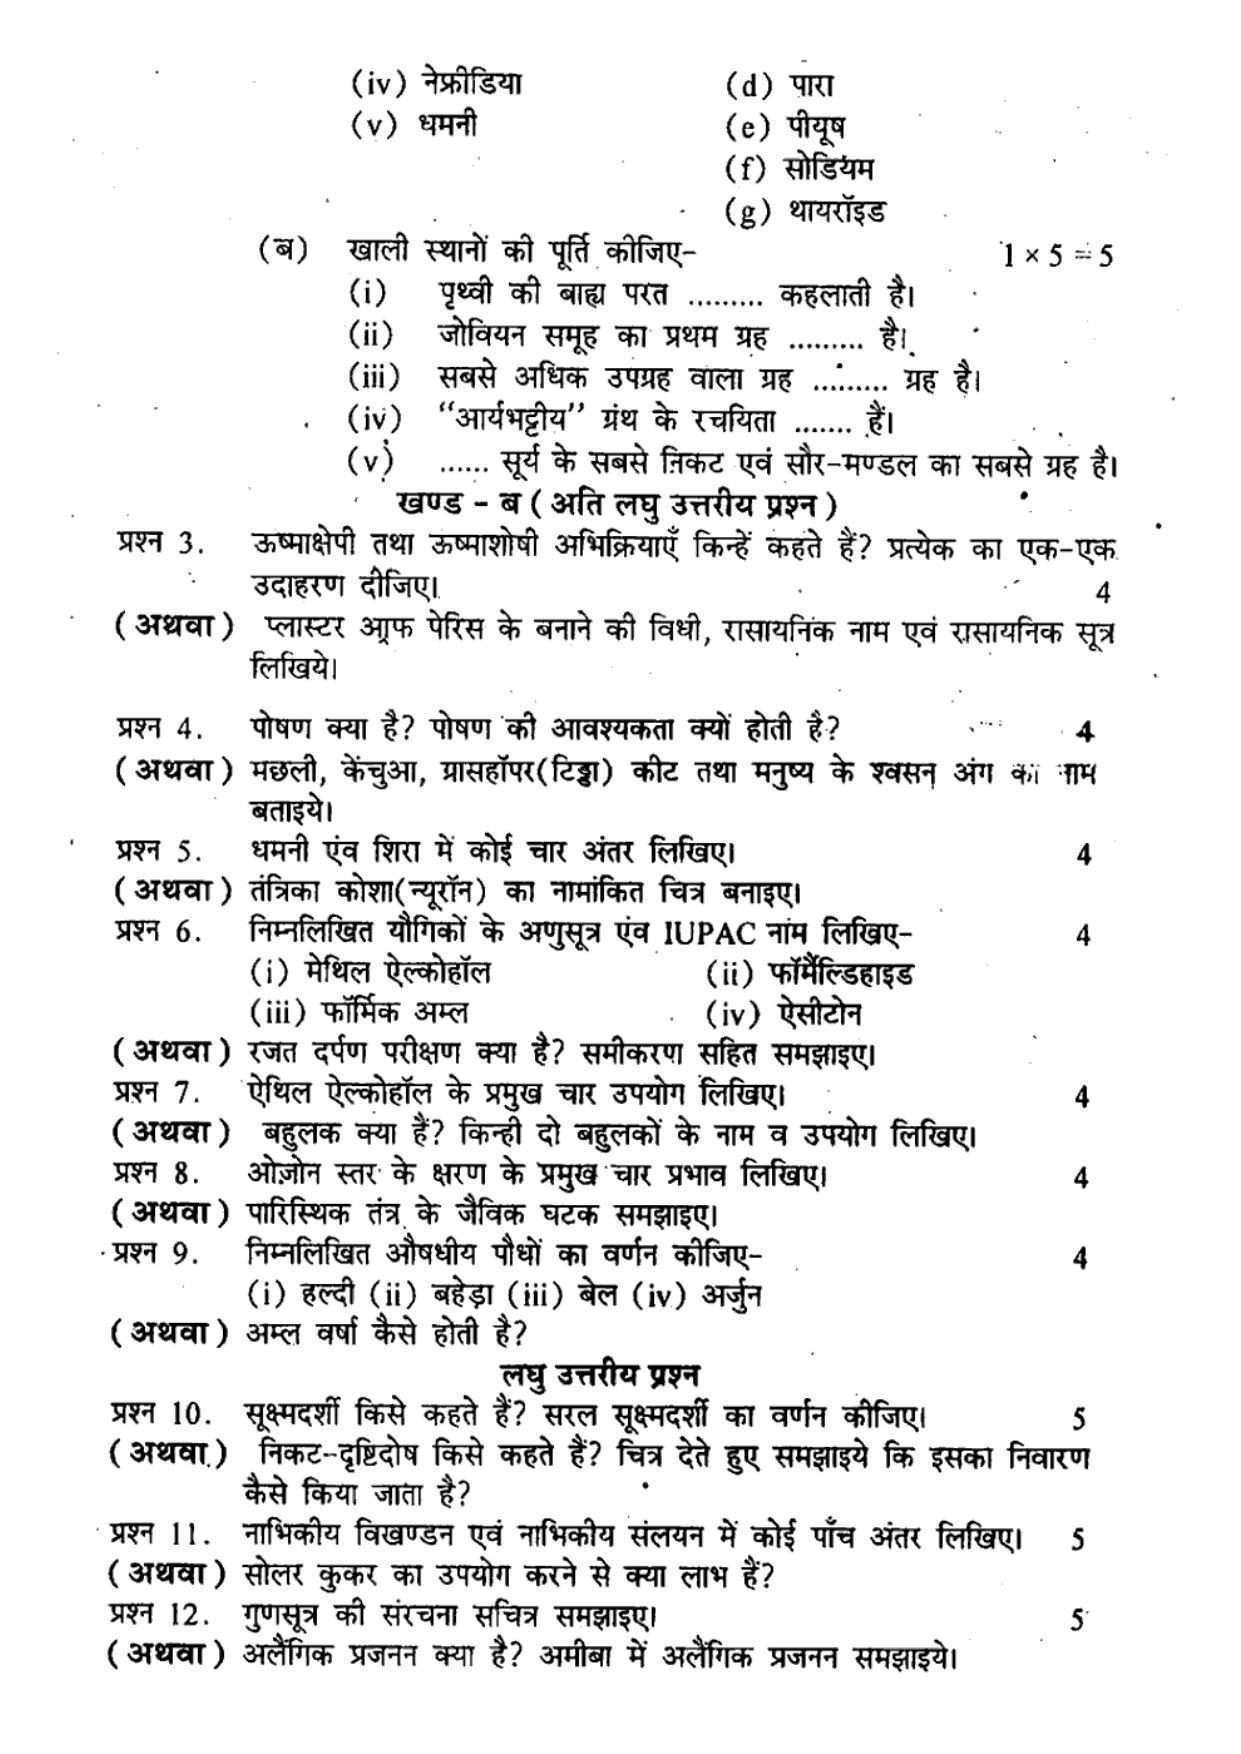 MP Board Class 10 Science (Hindi Medium) 2012 Question Paper - Page 2